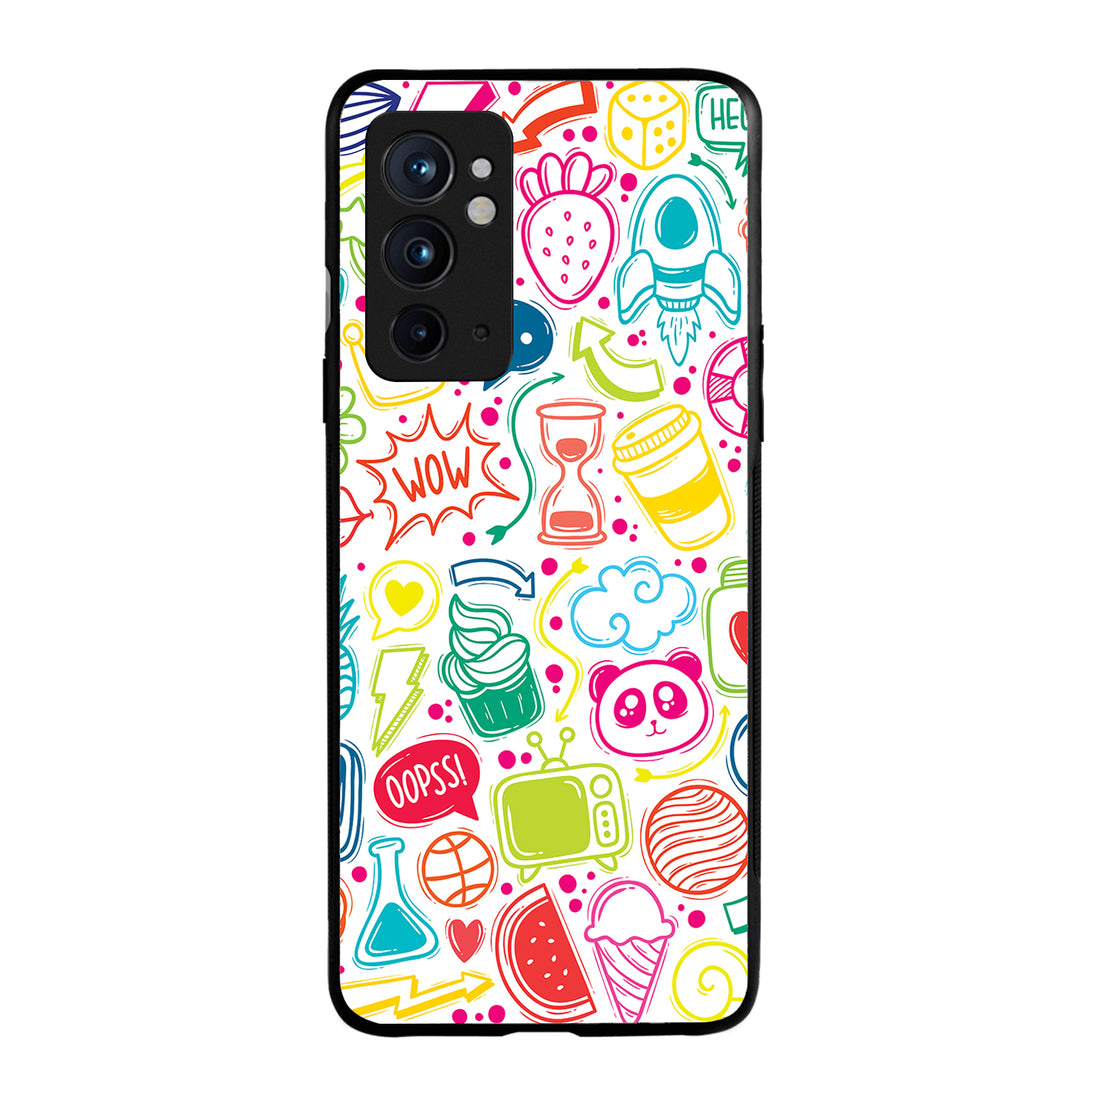 Wow Doodle OnePlus 9 RT Back Case